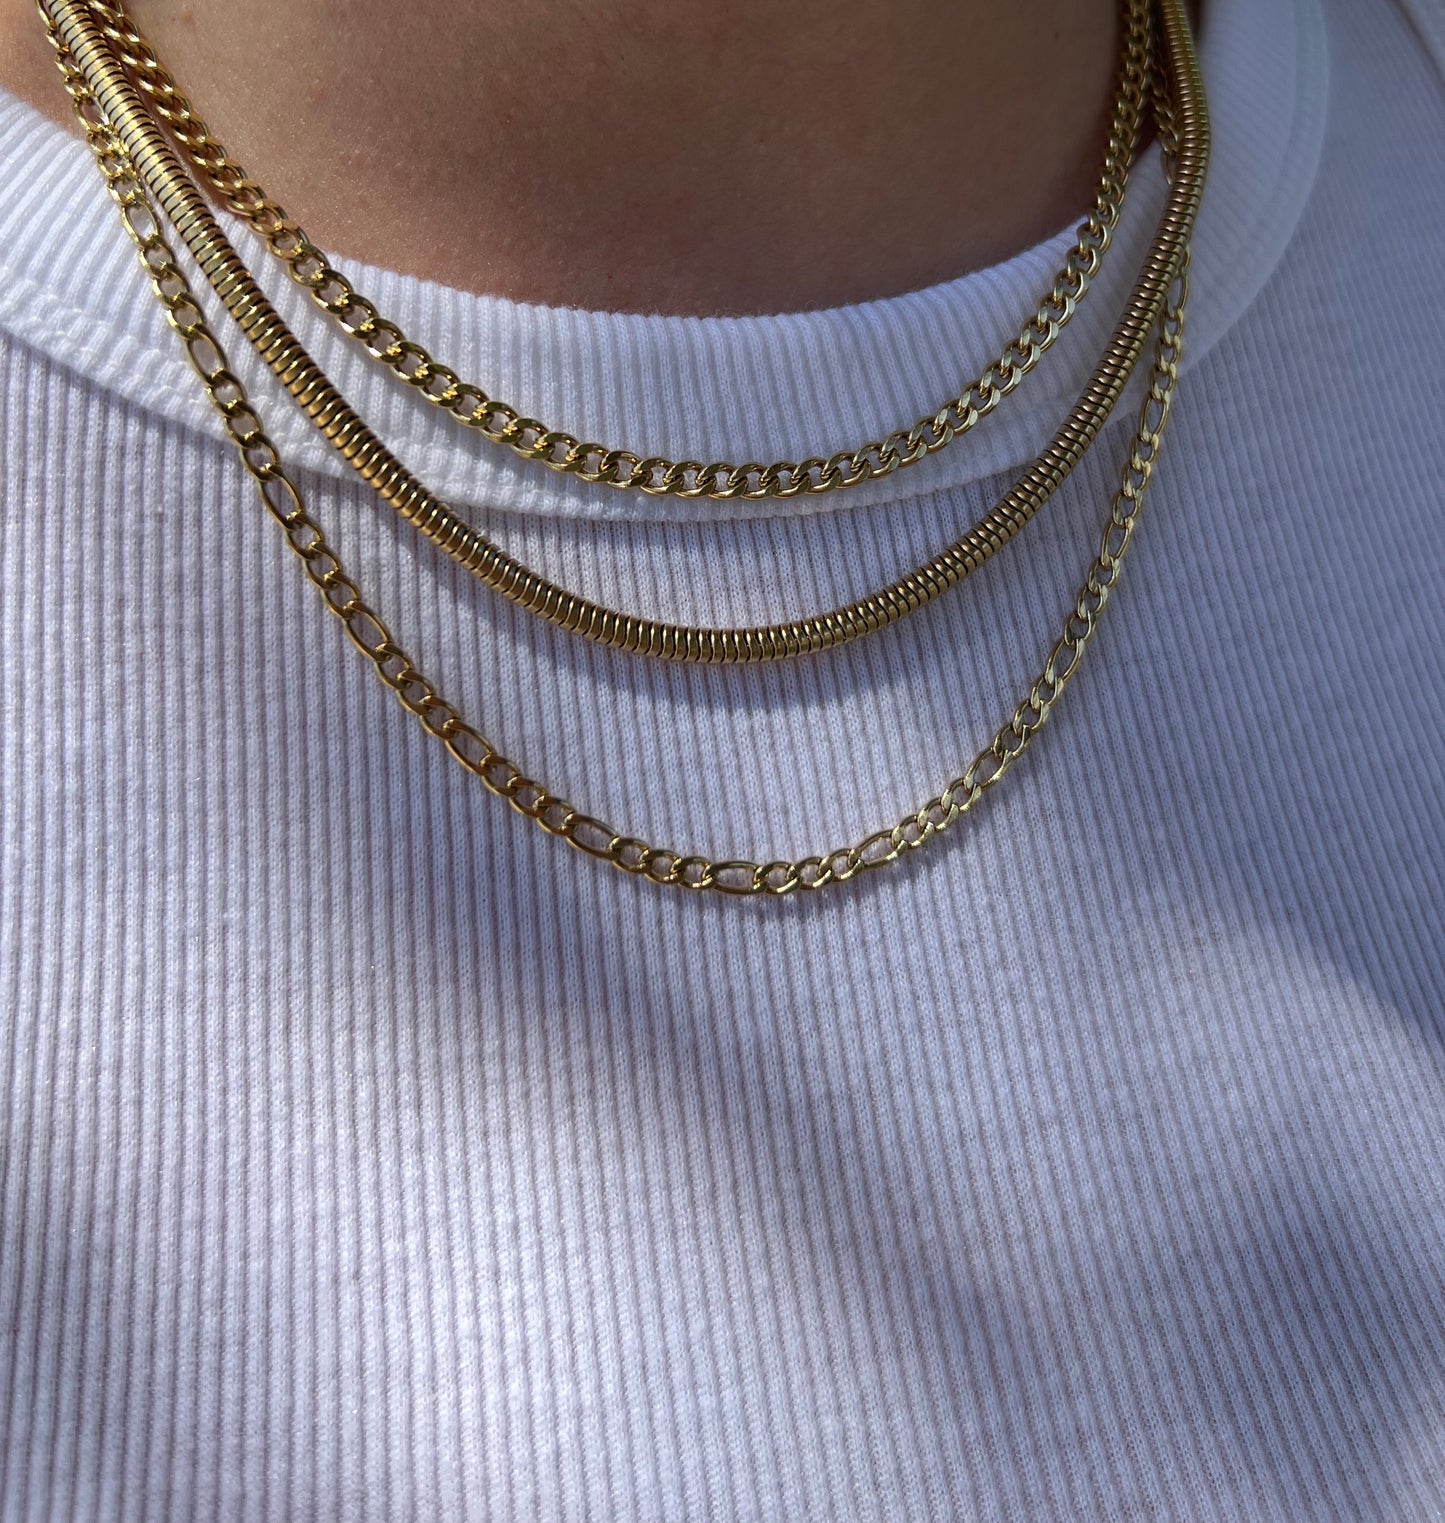 The Solare Necklace